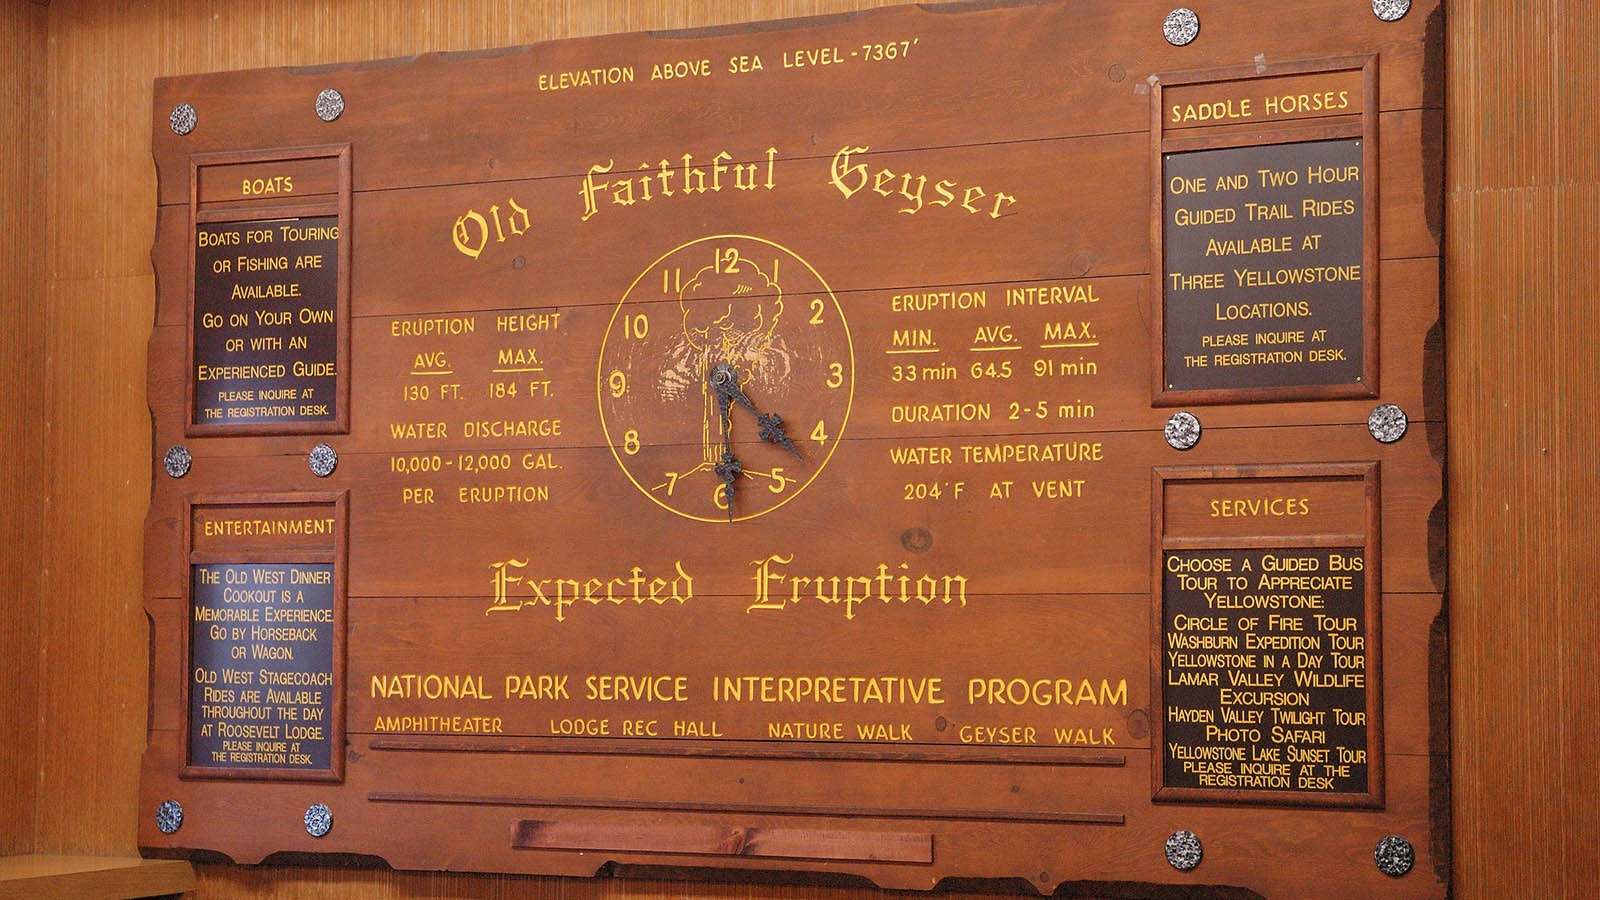 This beautiful, large Old Faithful Geyser Expected Eruption sign used to be prominently displayed in Old Faithful Lodge. In a pre-digital age, it gave all the information visitors needed to not only see the next eruption, but learn more about the world's most famous geyser.